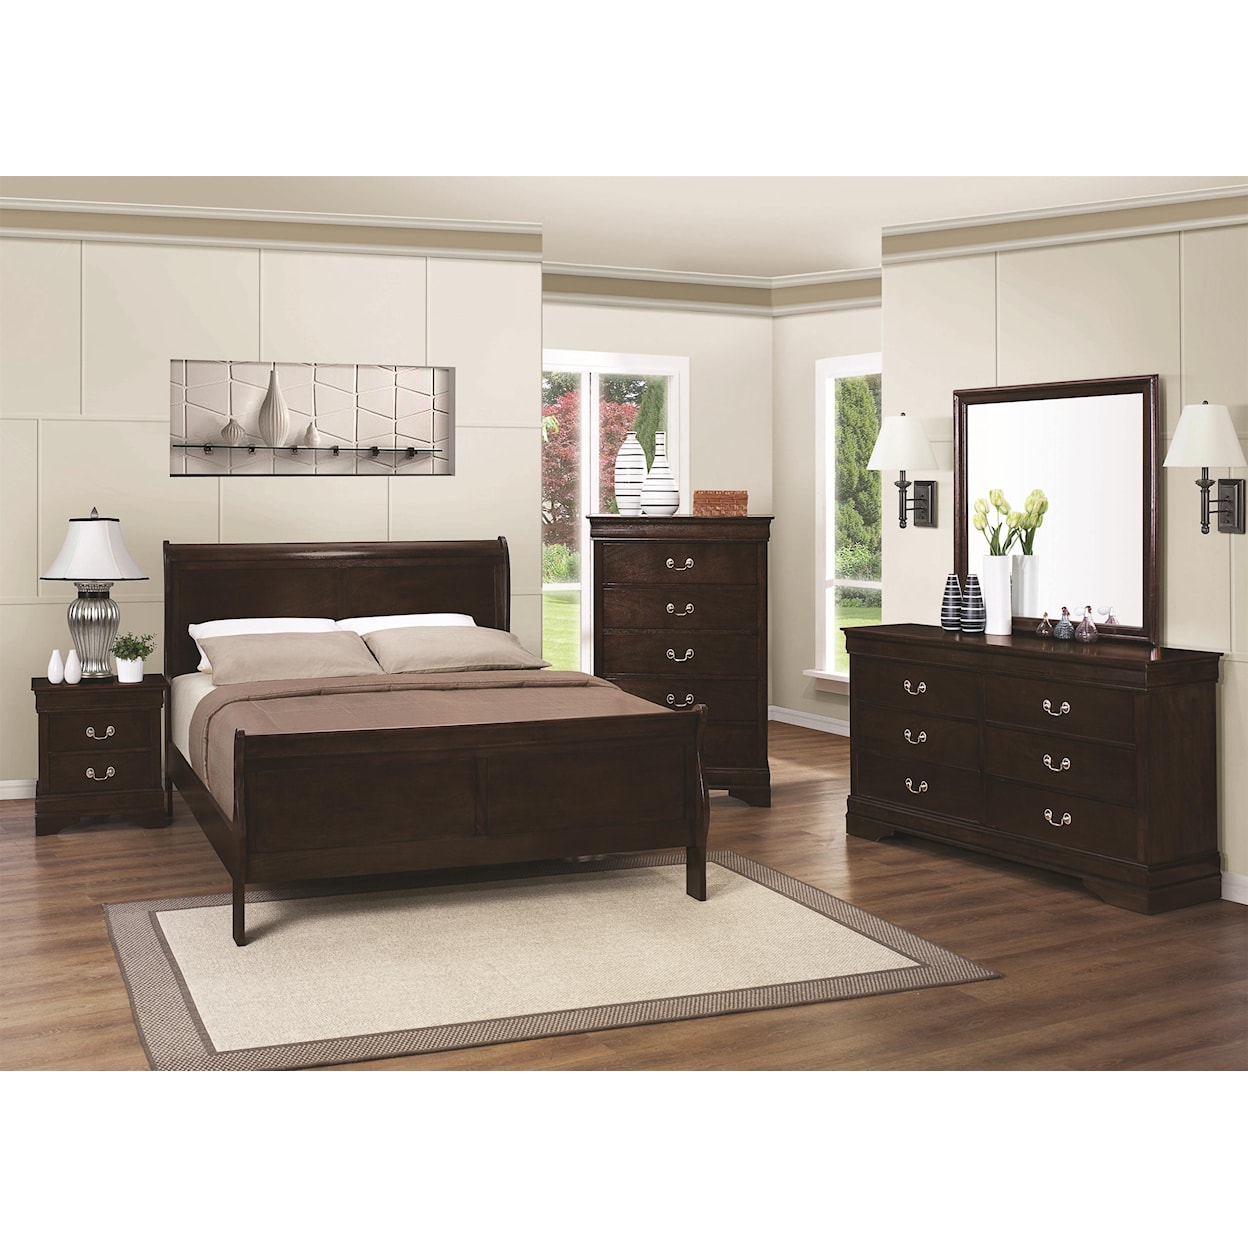 Coaster Louis Philippe 202 King Bedroom Group